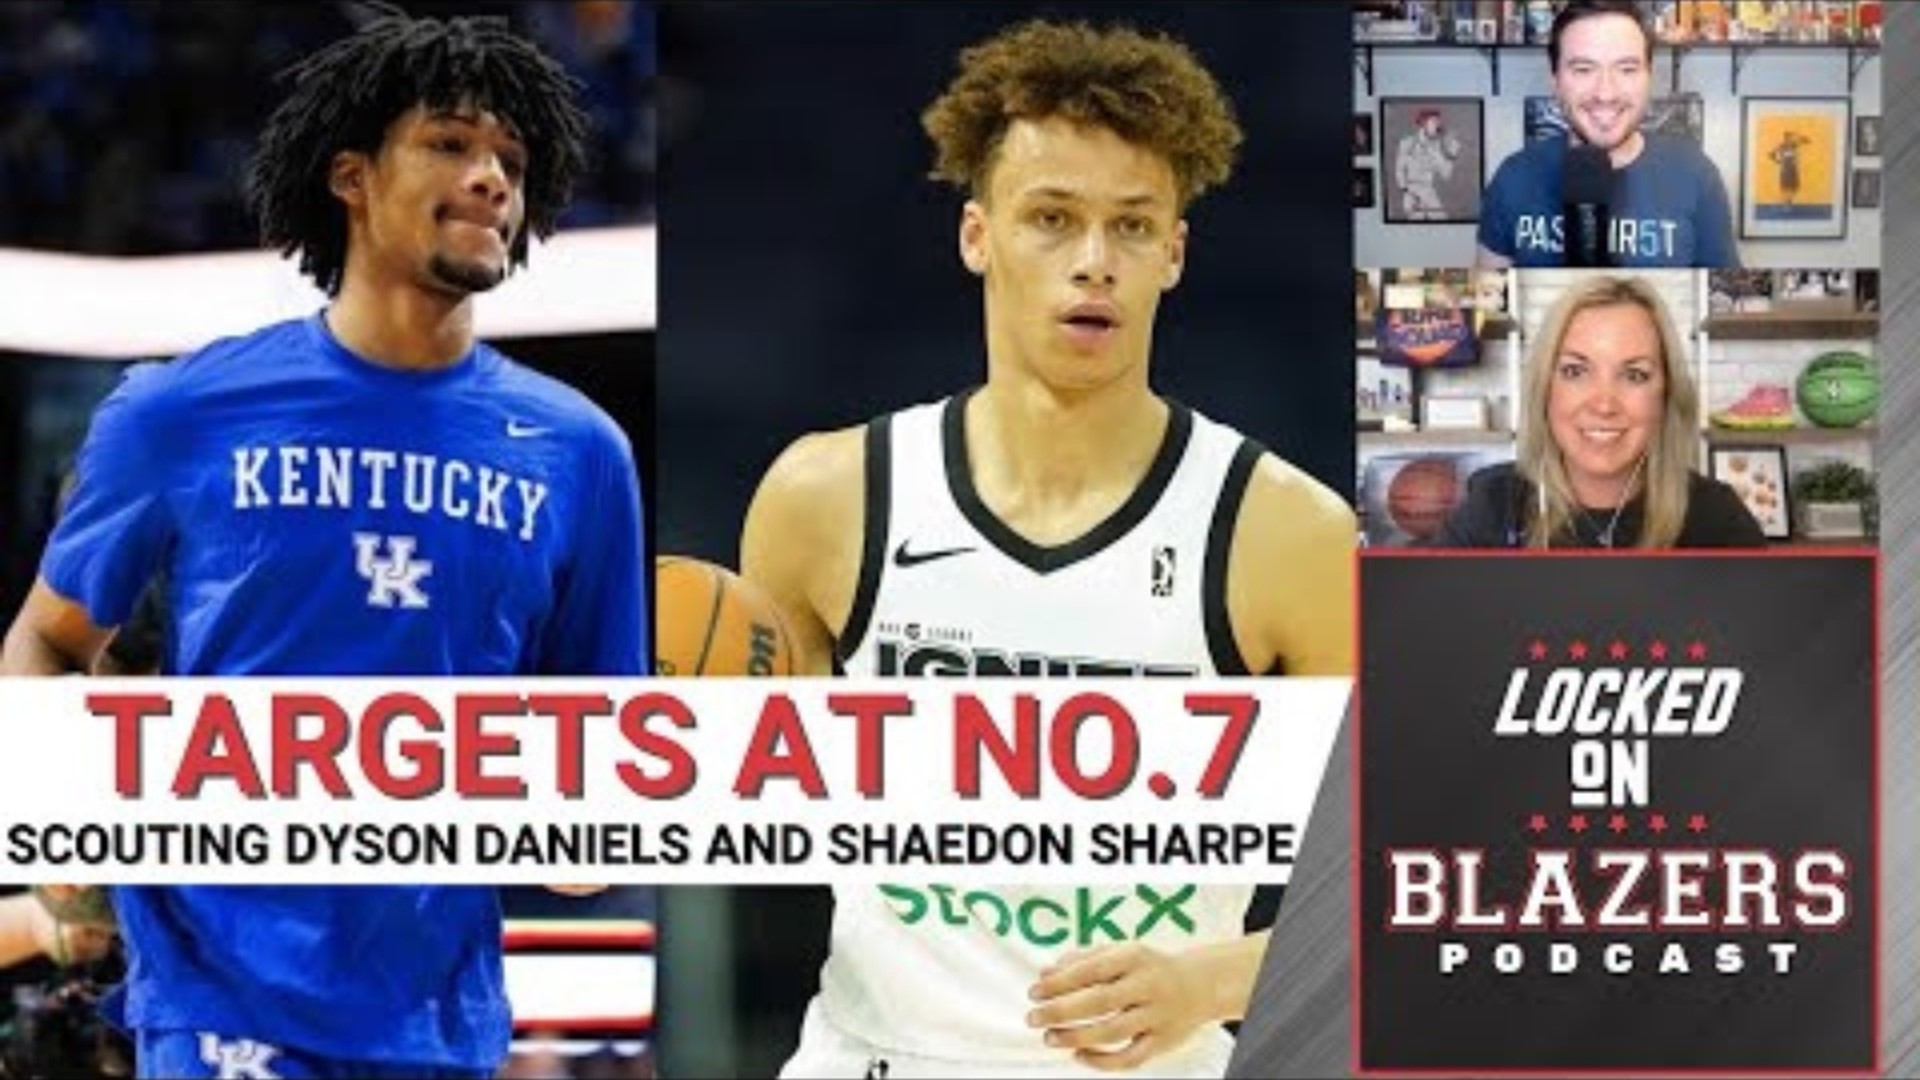 Krysten Peek of Yahoo Sports joins the program to talk about the latest NBA draft updates and who she has the Trail Blazers selecting in her latest mock draft.